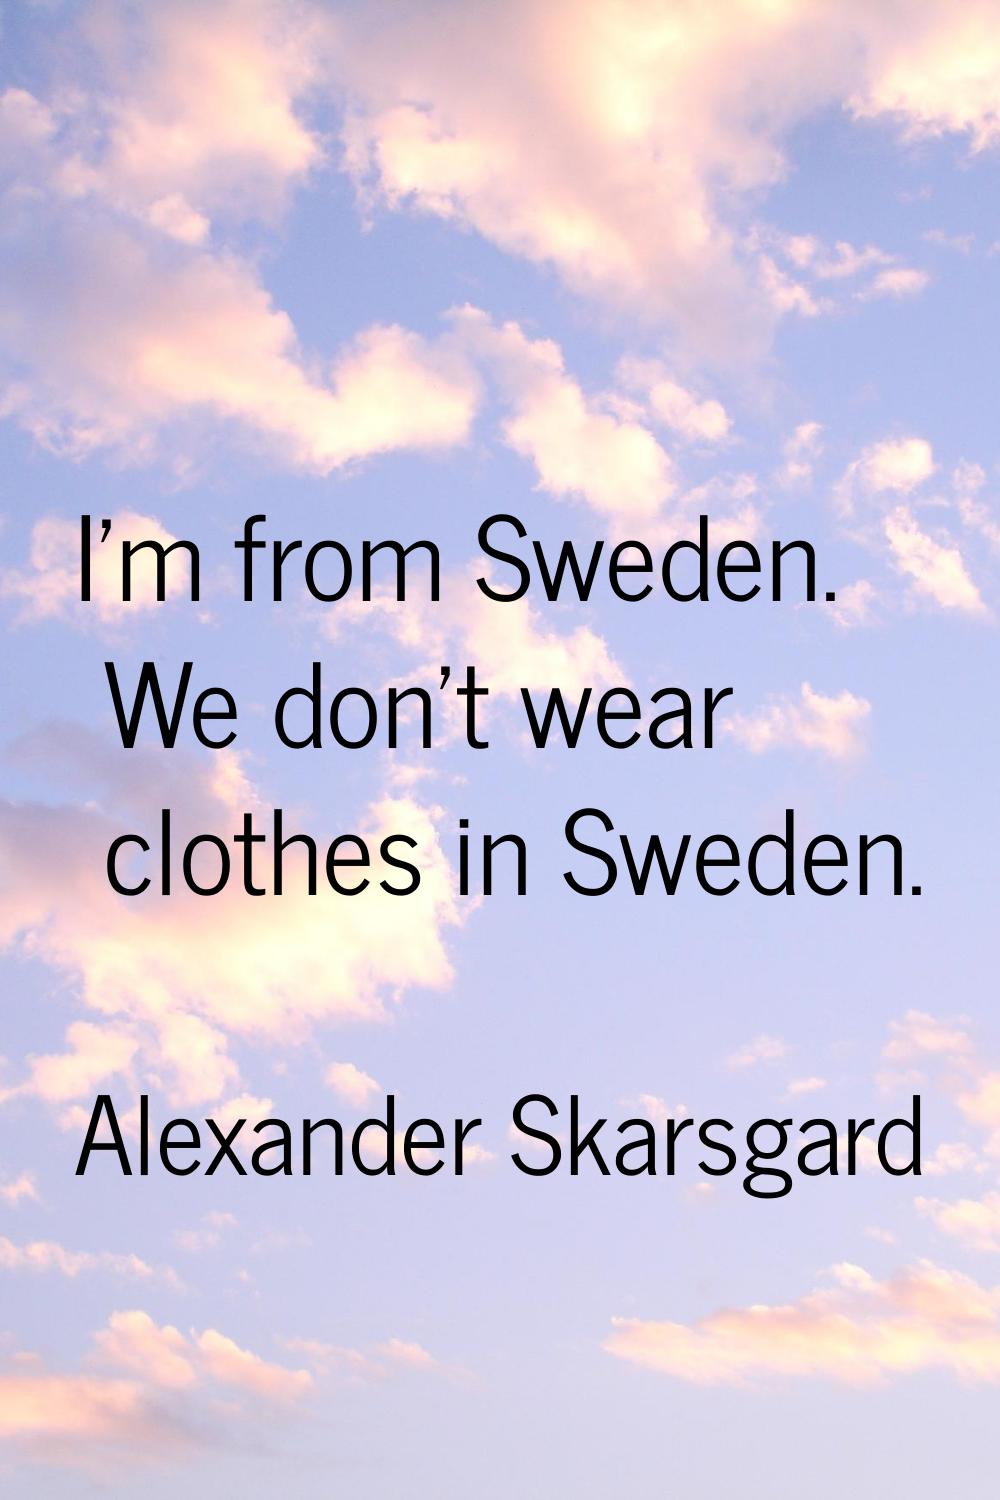 I'm from Sweden. We don't wear clothes in Sweden.